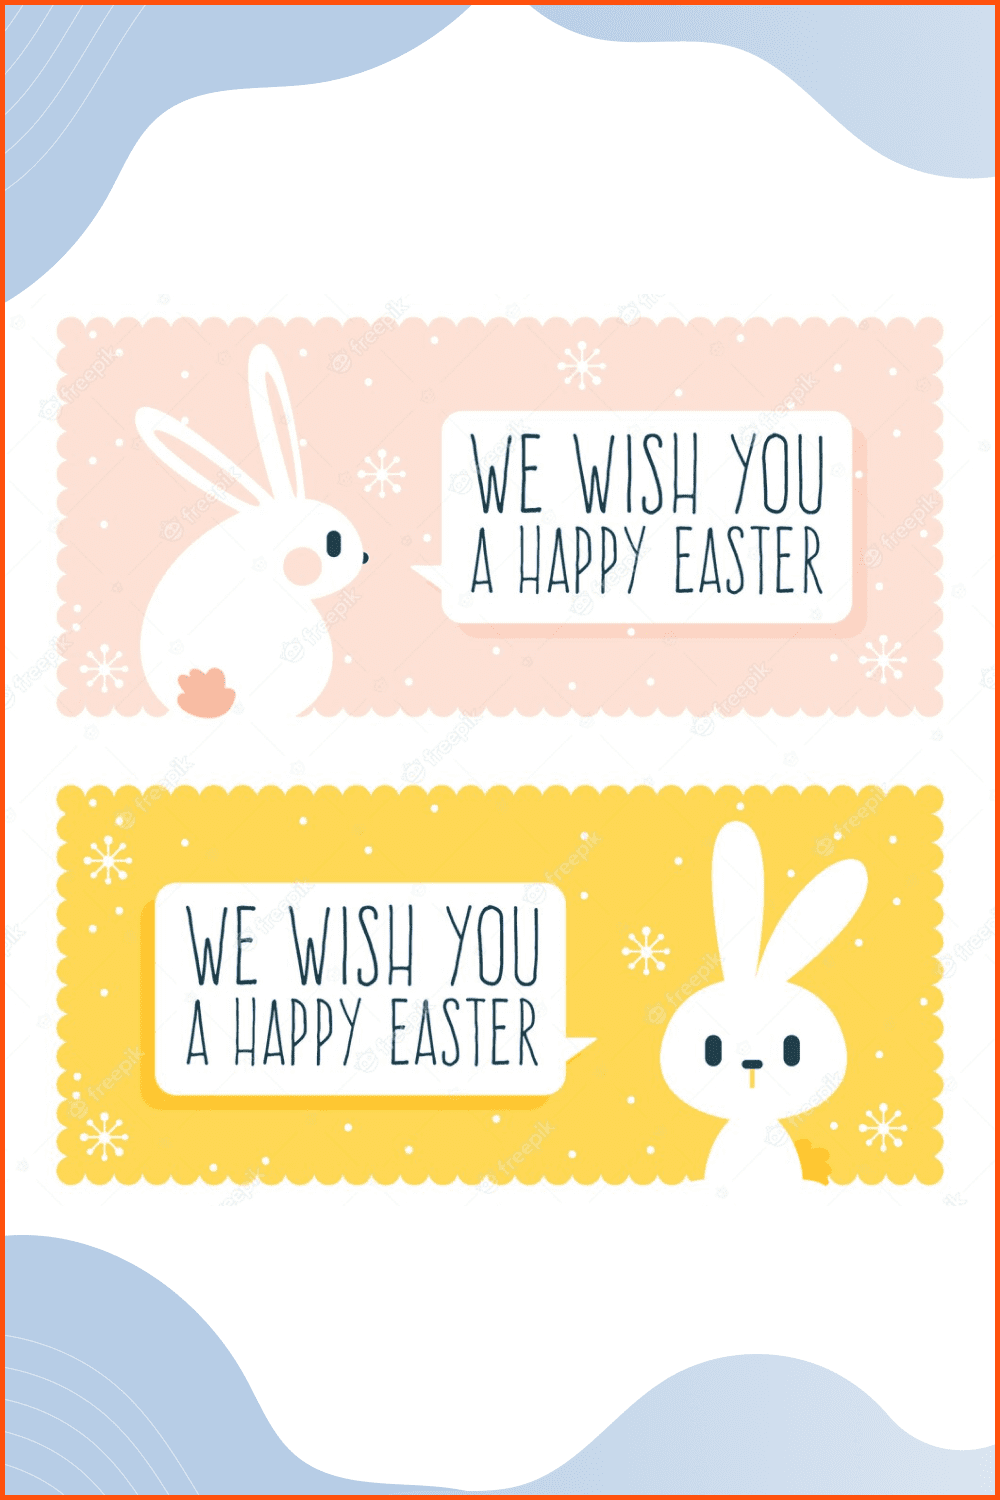 Cute easter banners with rabbit.